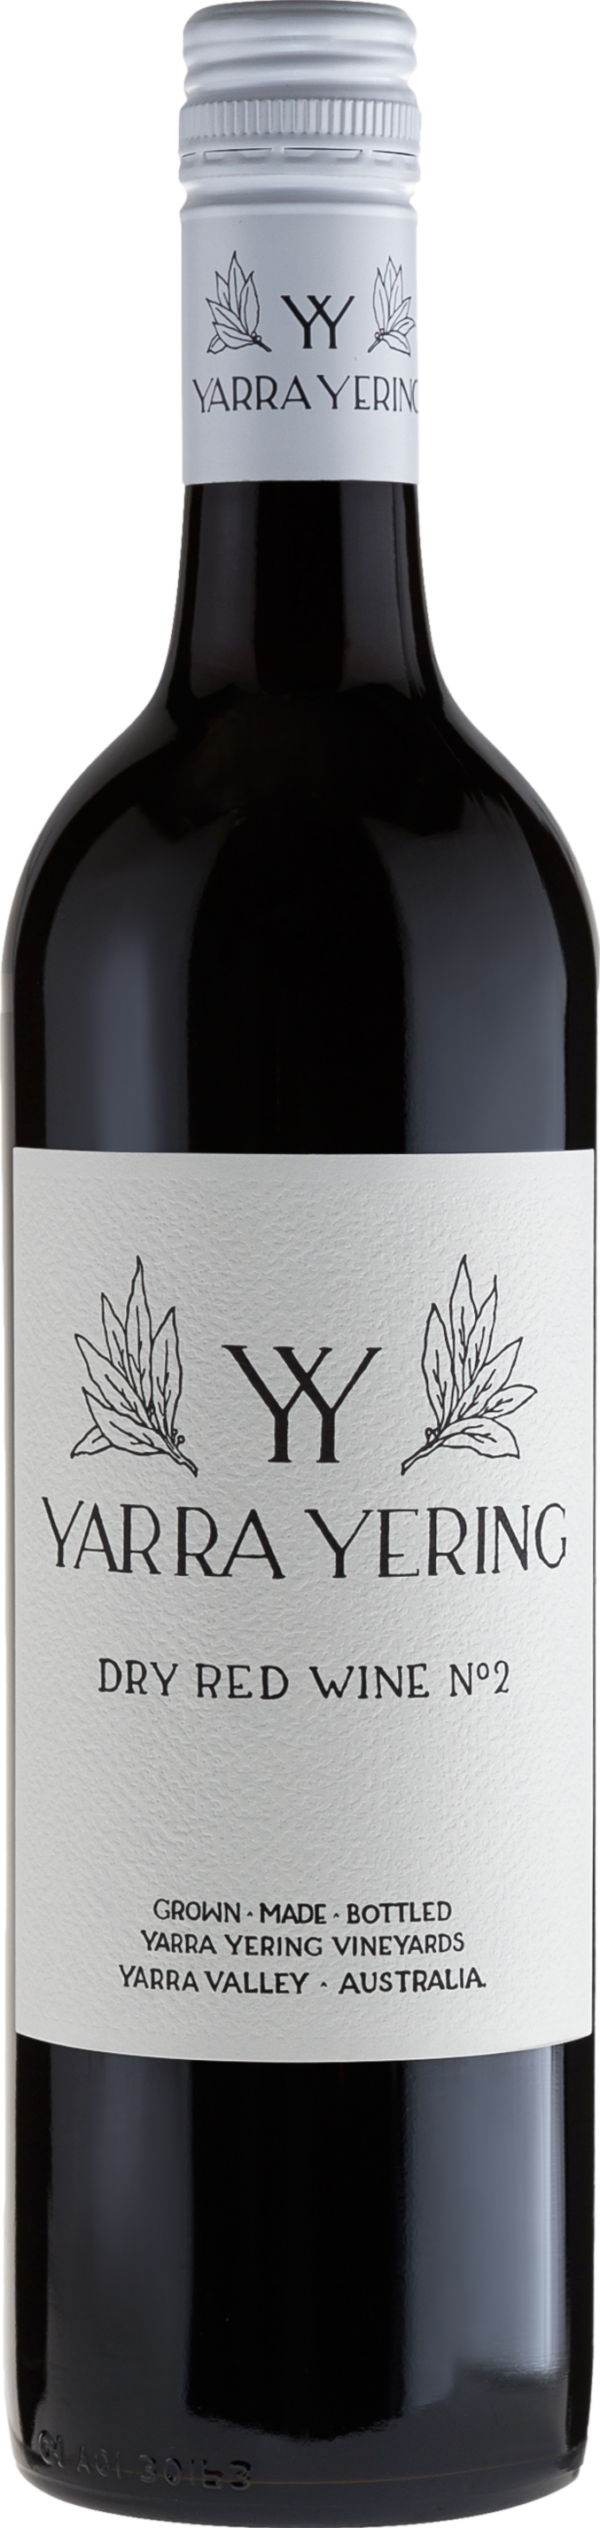 Product image of Yarra Yering Dry Red No 2 2016 from 8wines